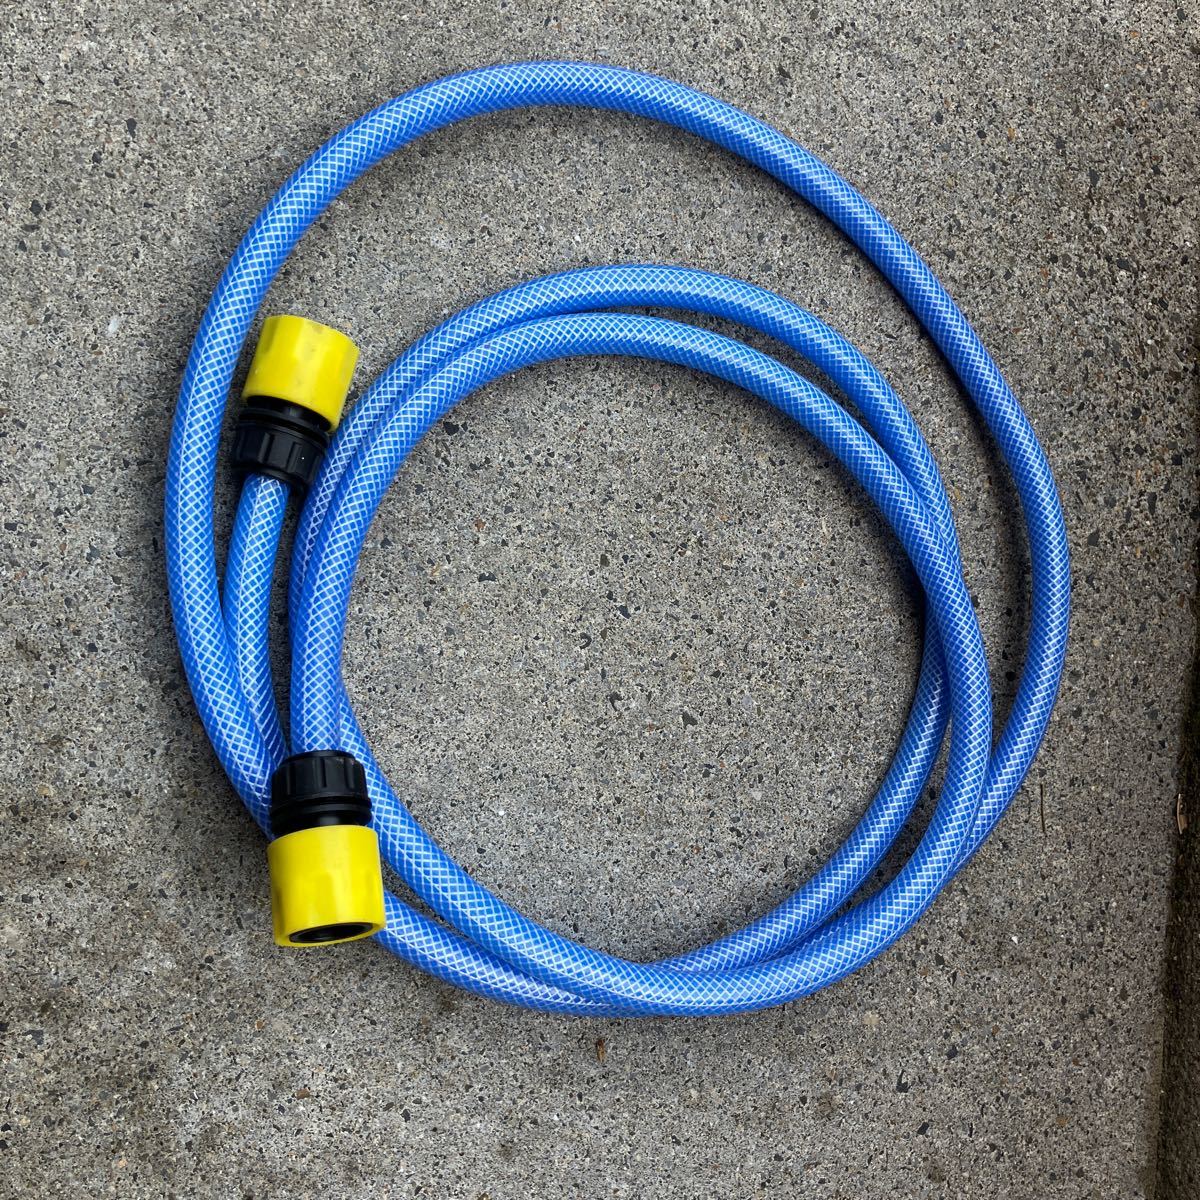  hose joint attaching 